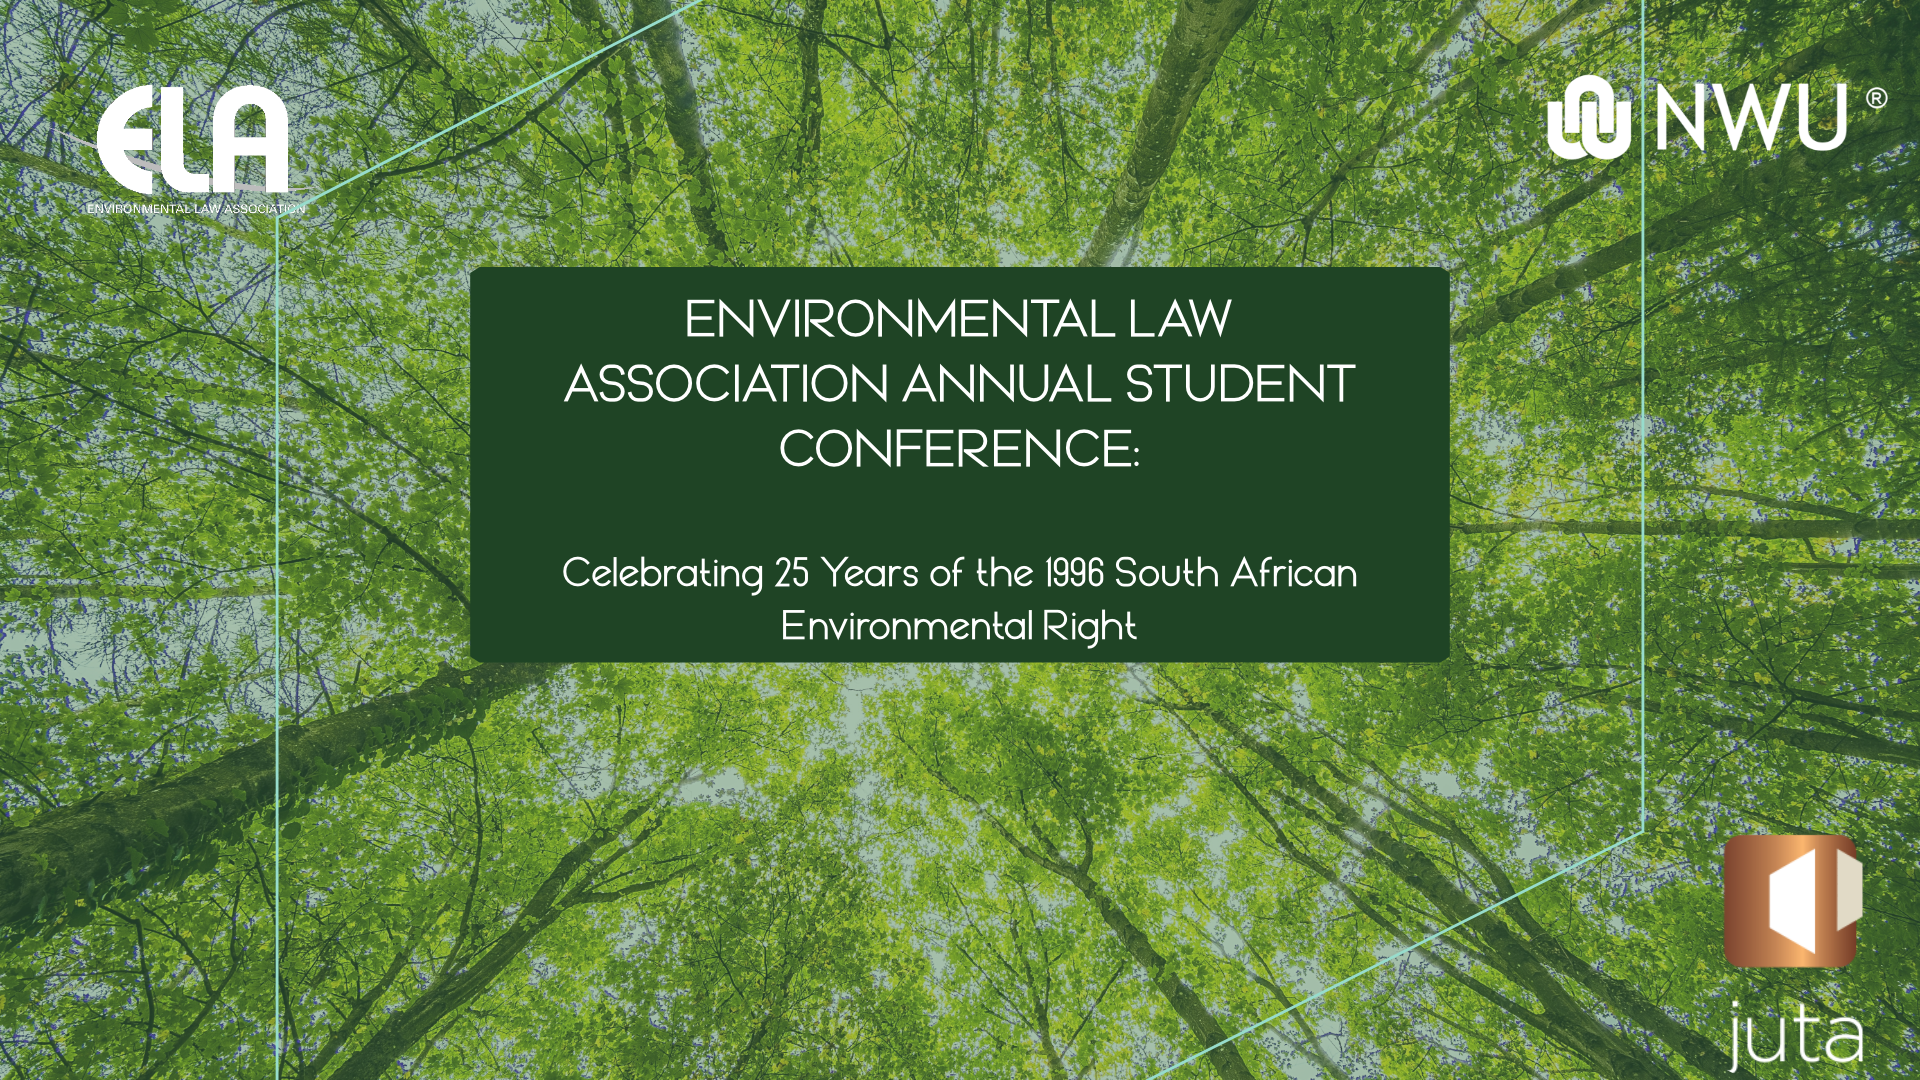 2021 Student Conference: Celebrating 25 Years of the 1996 South African Environmental Right